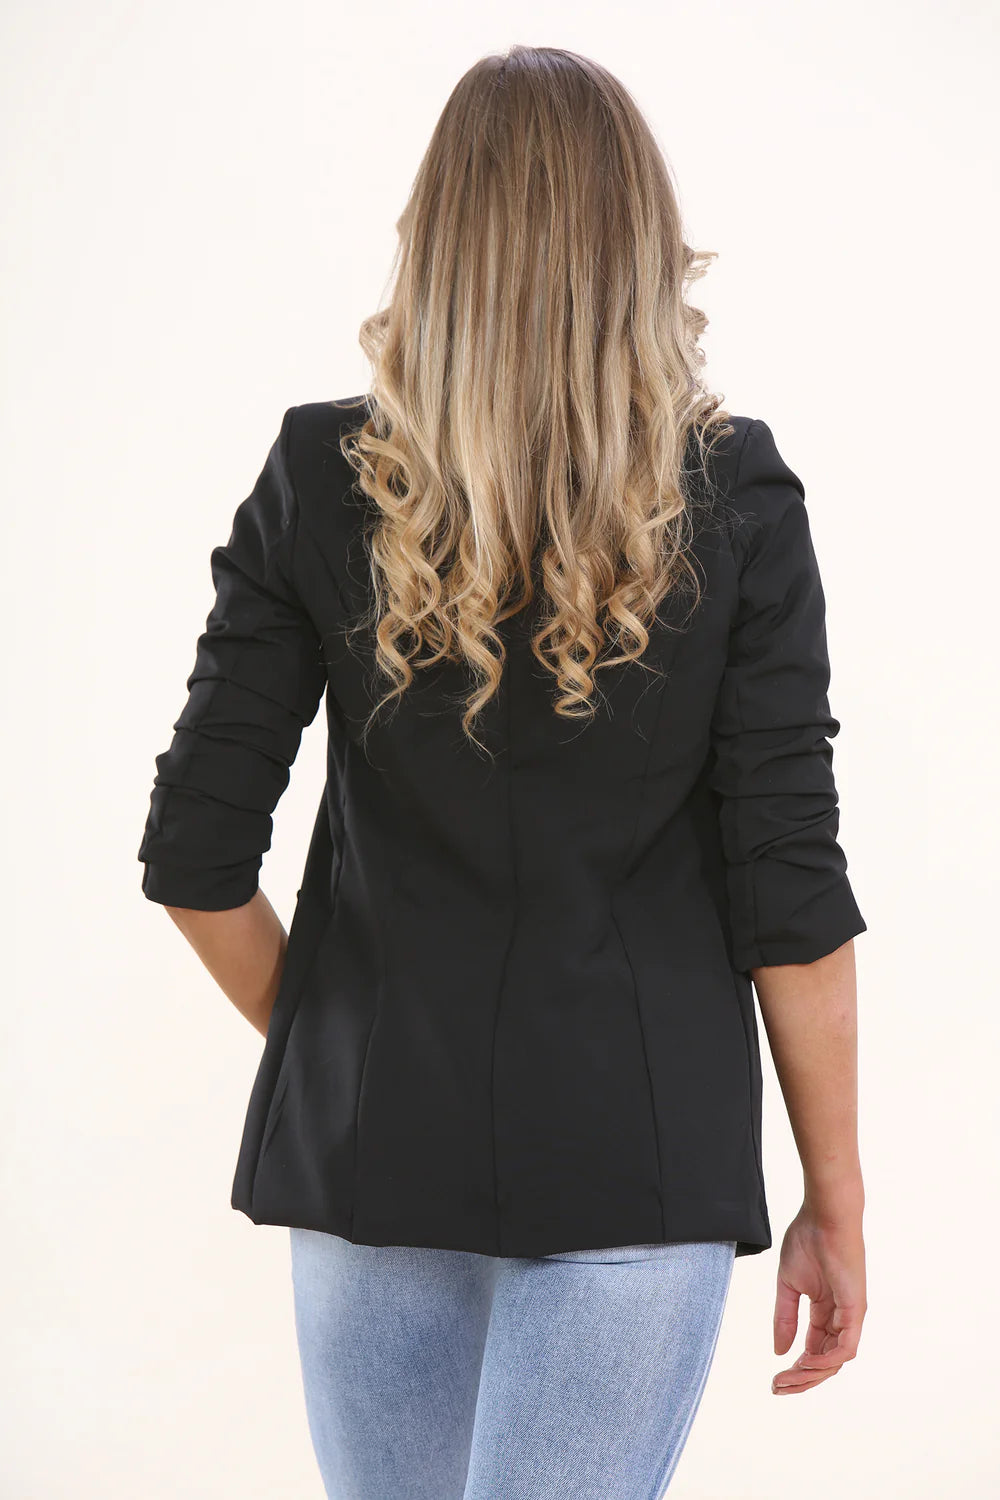 Black ruched sleeve blazer in a range of sizes & plus sizes